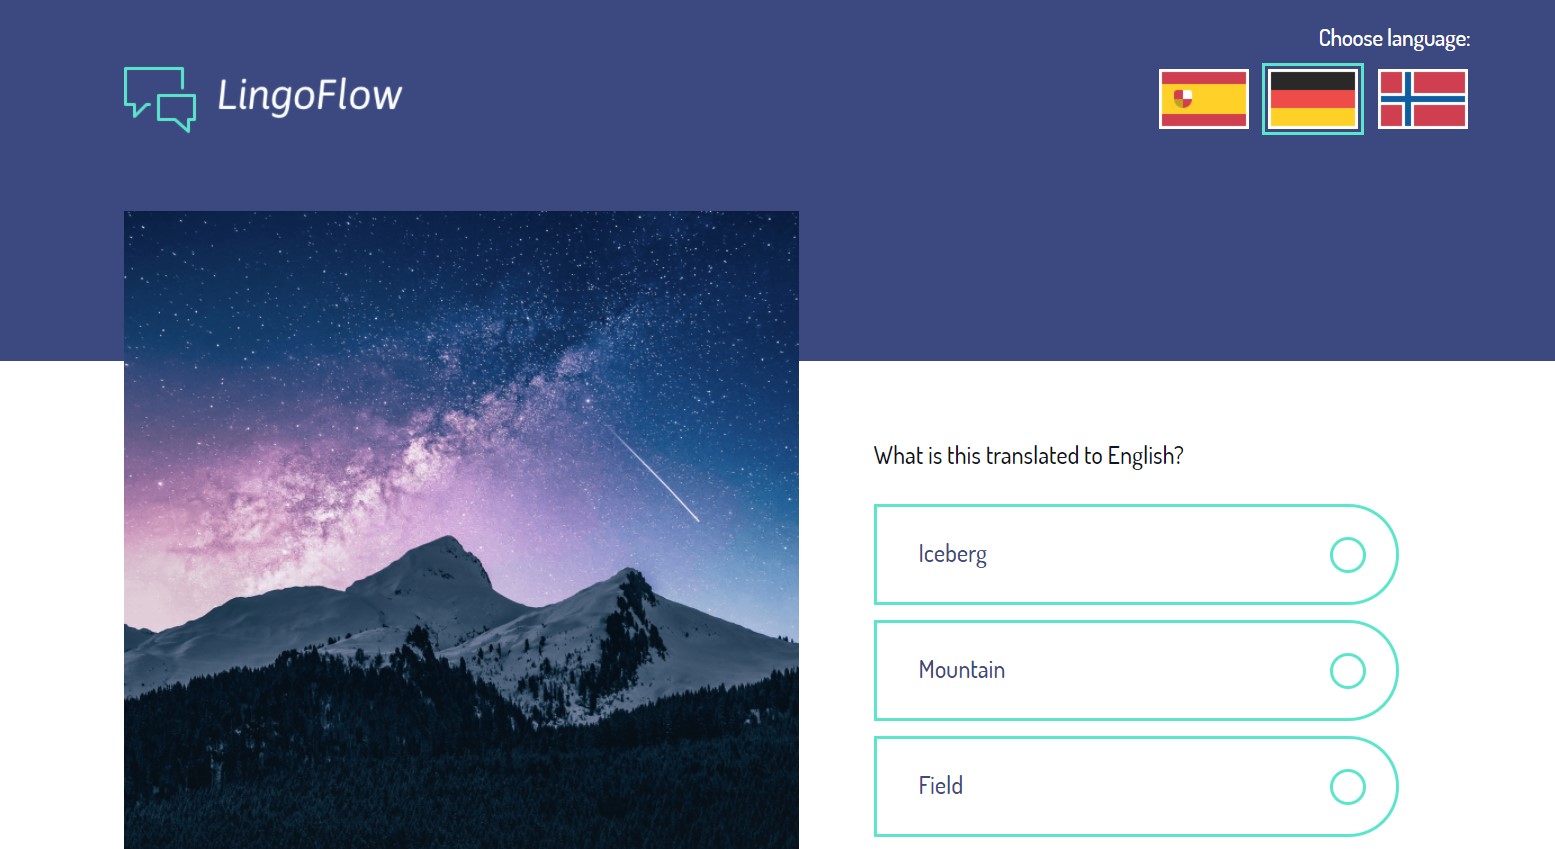 Screenshot of LingoFlow: features Spanish, German, Dutch flags in upper right; left hand side has a picture of a mountain at night with a shooting star in the sky; right hand side has a quiz interface that says “What is this translated to English?” with the options “Iceberg”, “Mountain”, “Field”